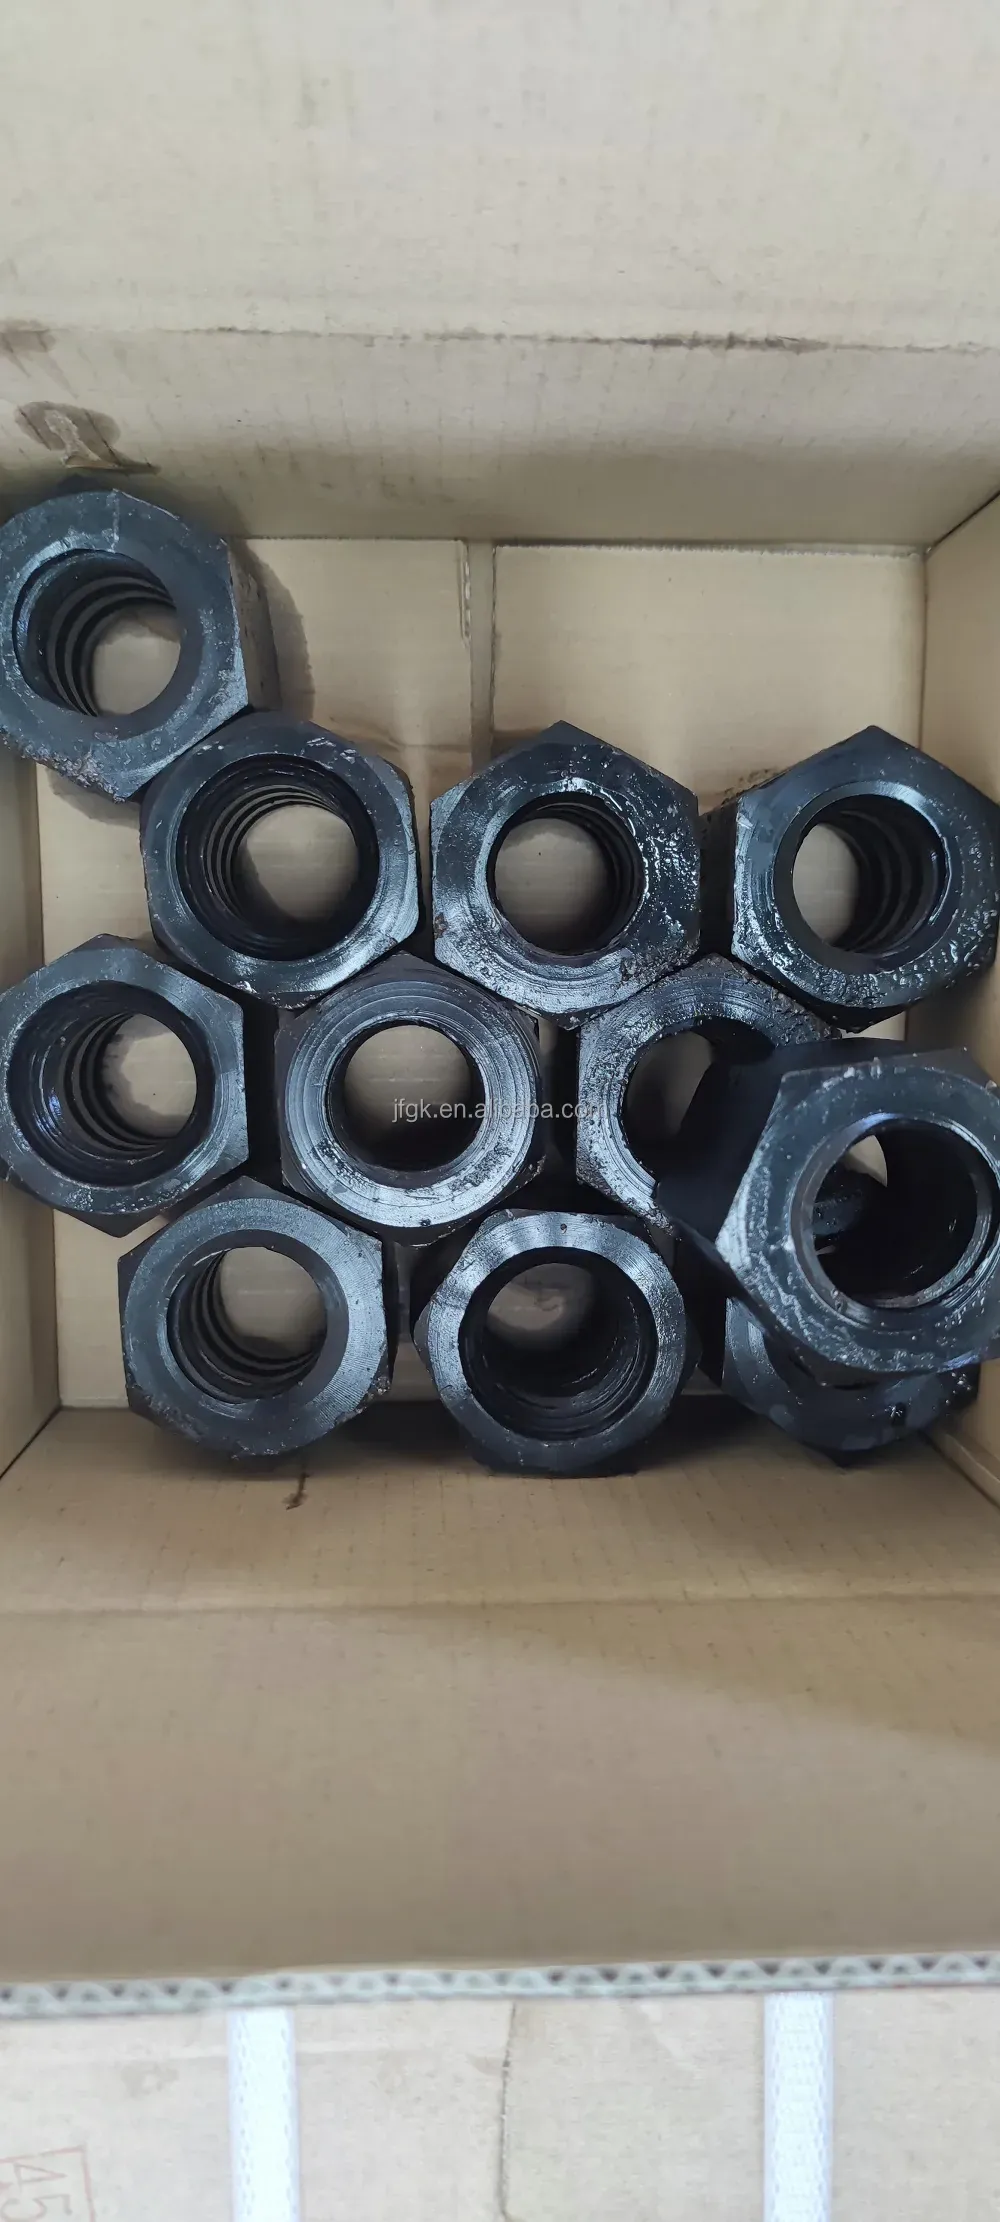 Railway Accessory Bolts And Nuts factory Ball nut Dome nut and m25 m32 m40 roof bolt for mine roof support